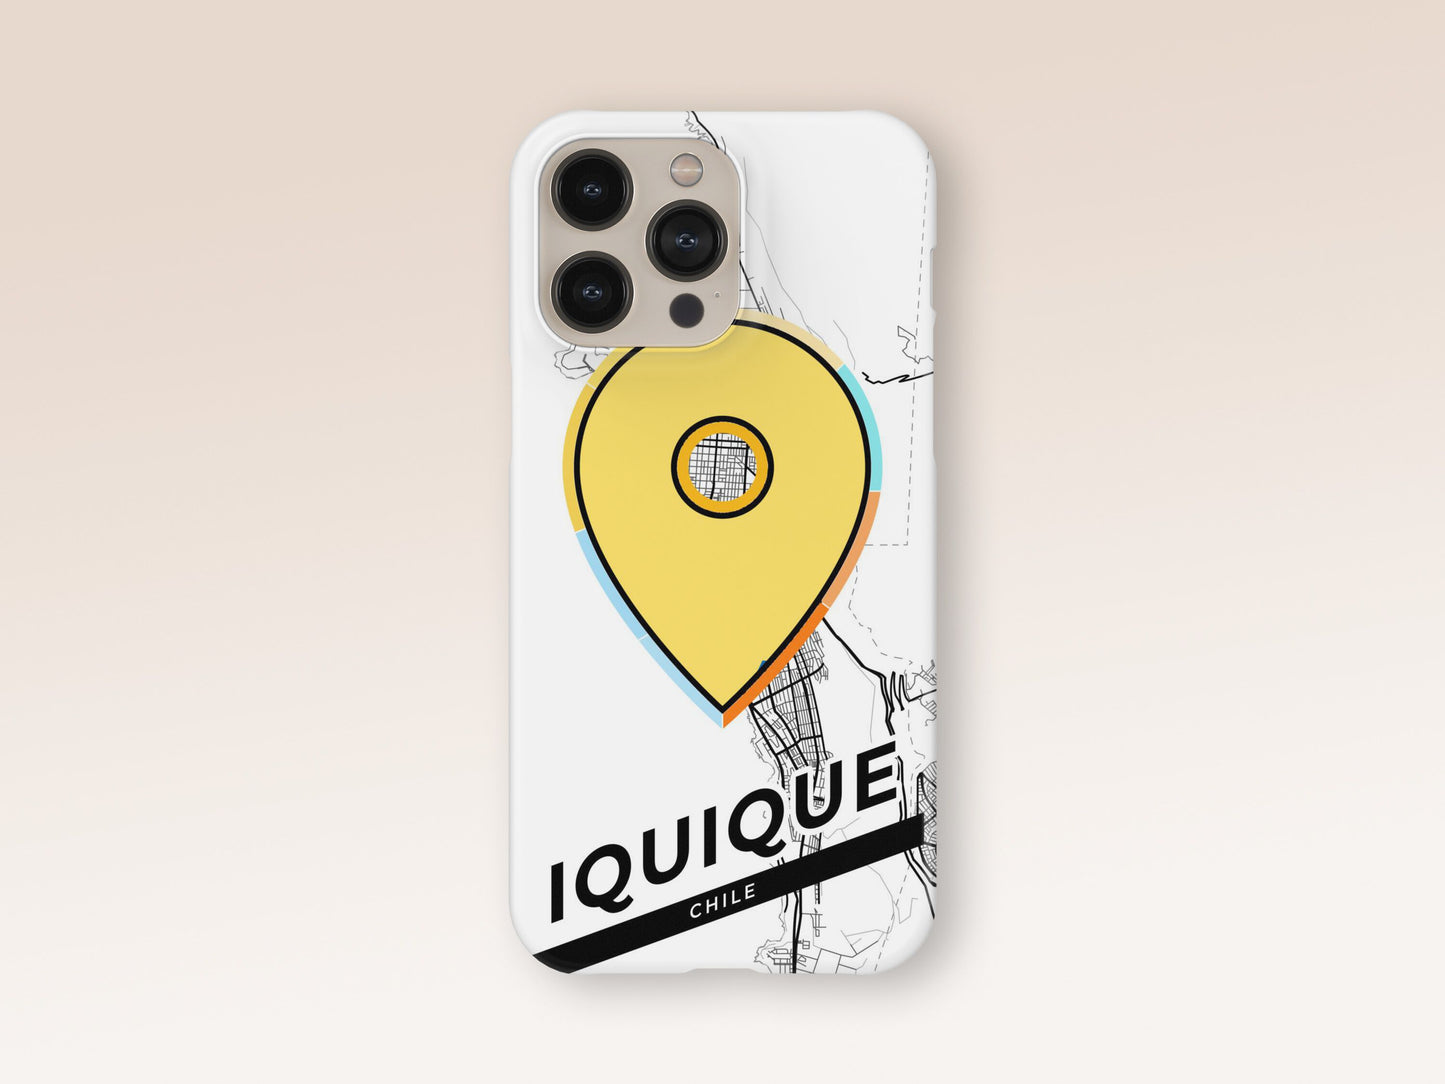 Iquique Chile slim phone case with colorful icon. Birthday, wedding or housewarming gift. Couple match cases. 1